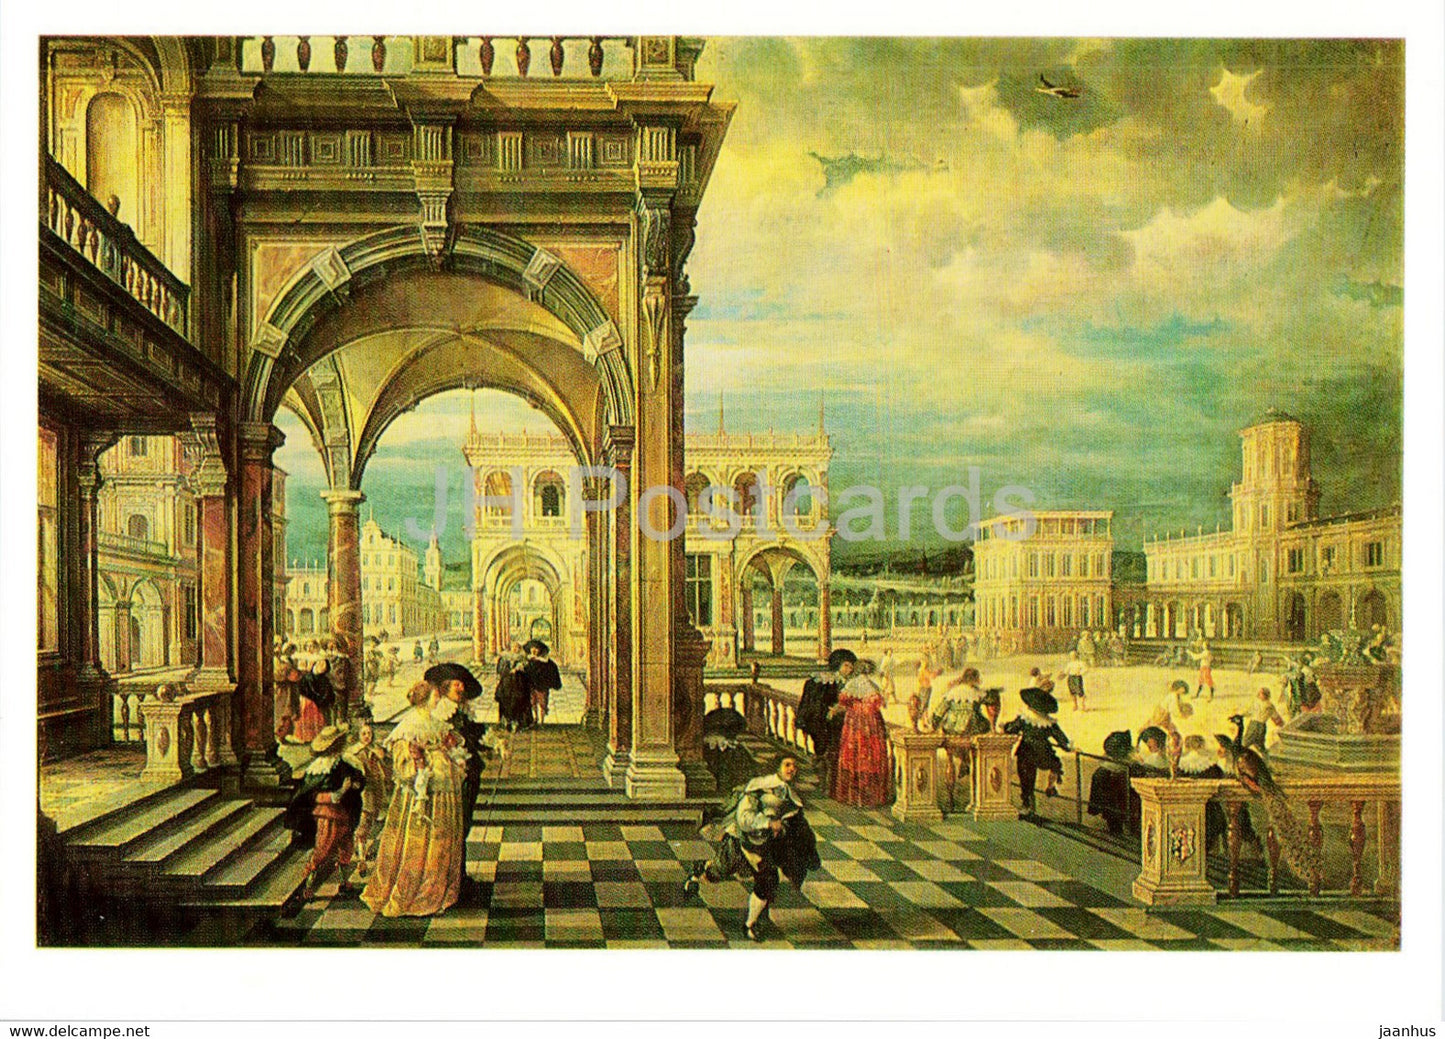 painting by Hendrik van Steenwyck the Younger - An Italian Palace - Flemish art - 1988 - Russia USSR - unused - JH Postcards